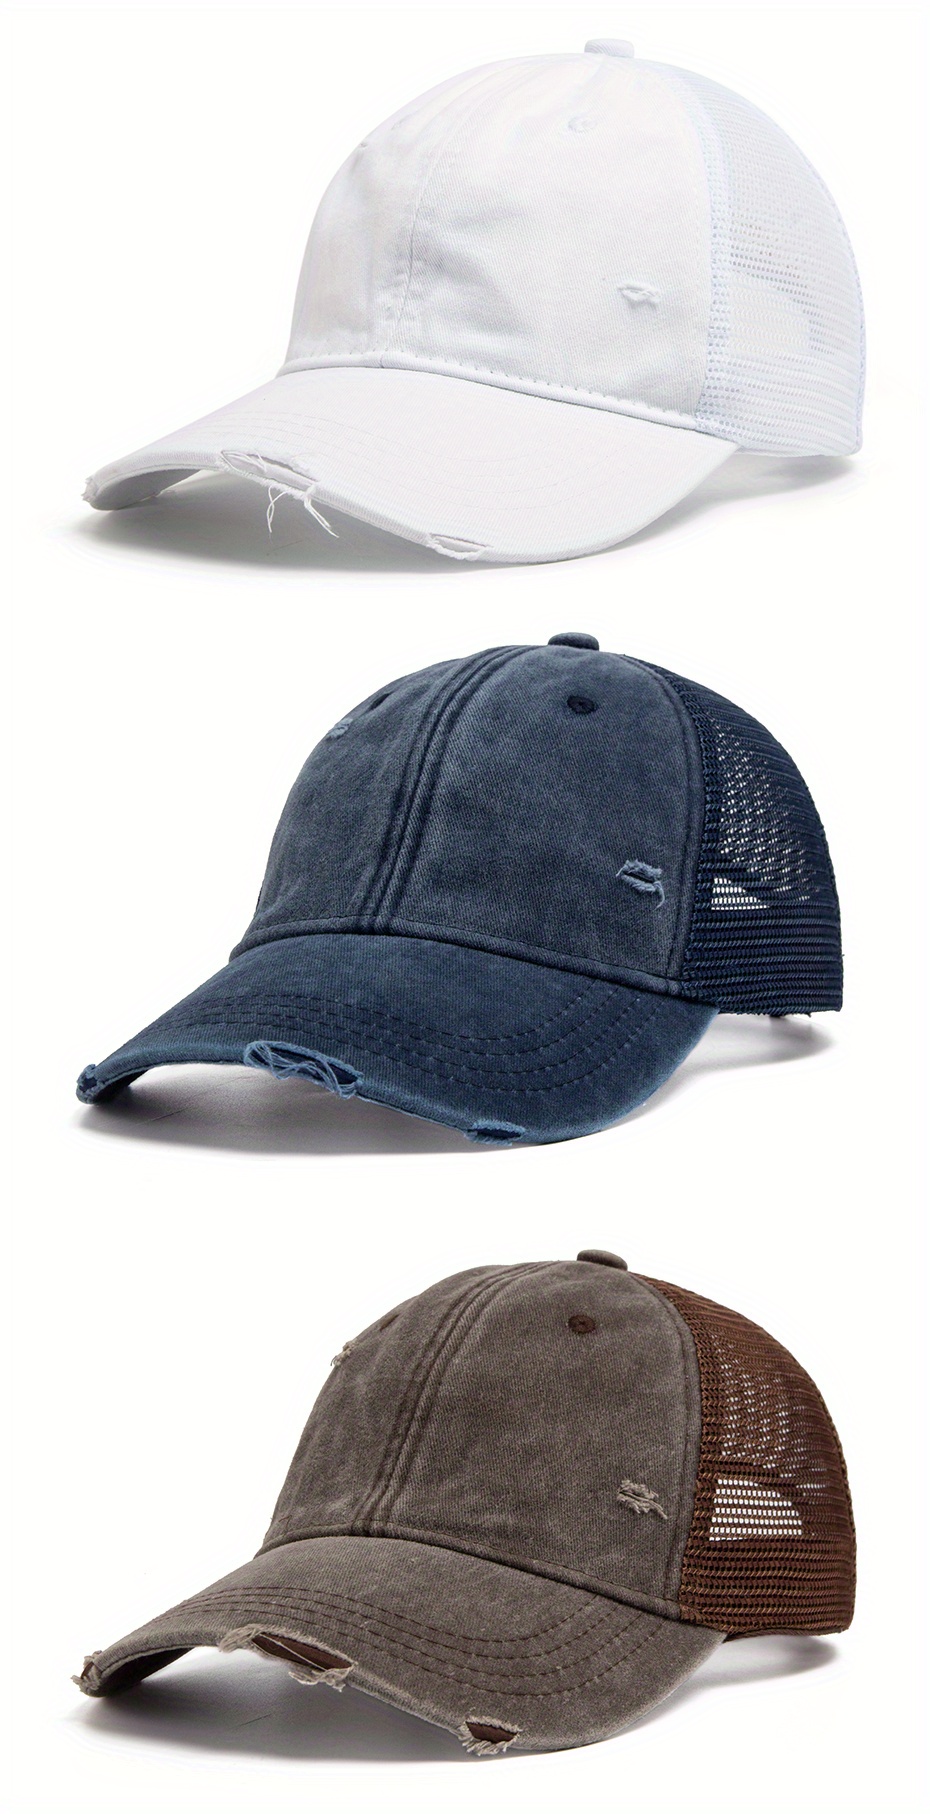 Summer Mesh Hiking Baseball Cap For Men And Women Quick Drying, Waterproof,  And Fashionable Snapback Hat For Fishing, Camping, Fishing And Outdoor  Sports X0927 From Qiuti18, $10.45